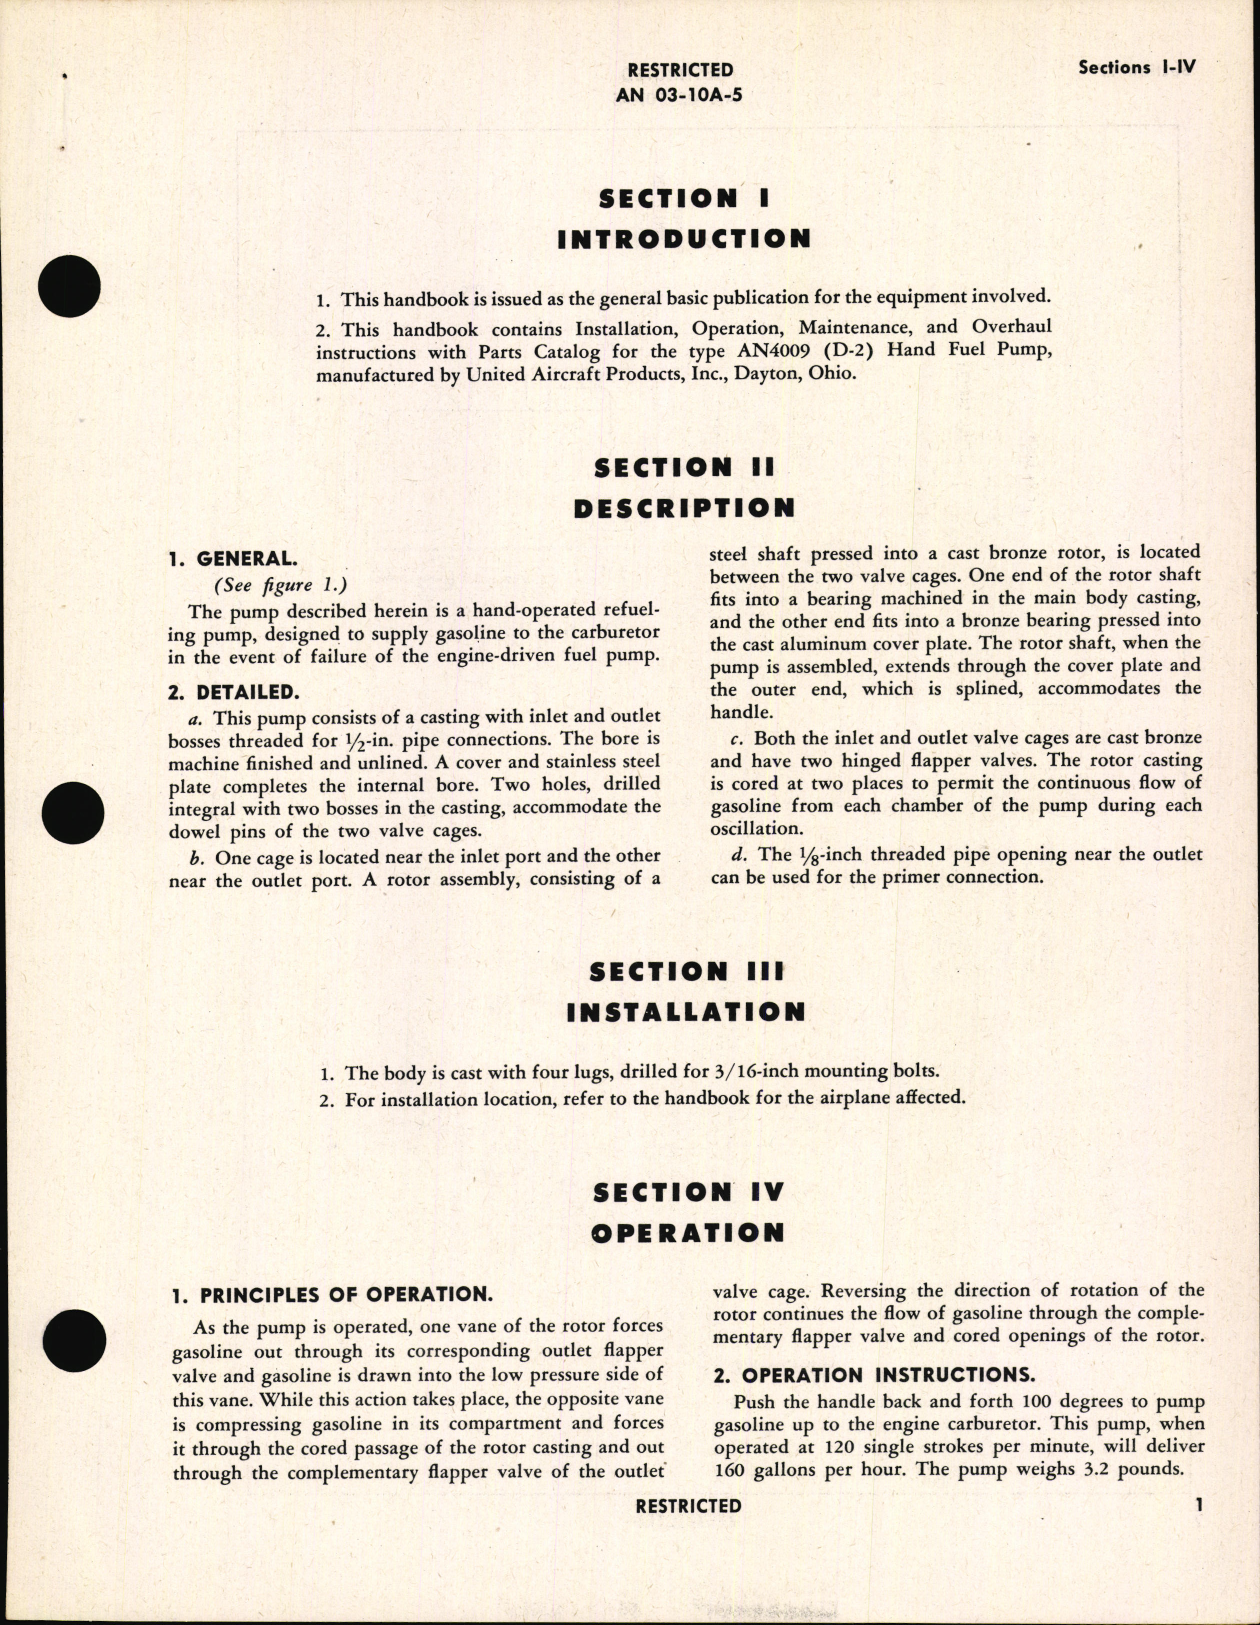 Sample page 5 from AirCorps Library document: Handbook of Instructions with Parts Catalog for Type AN4009 Hand Fuel Pump (Army Type D-2)